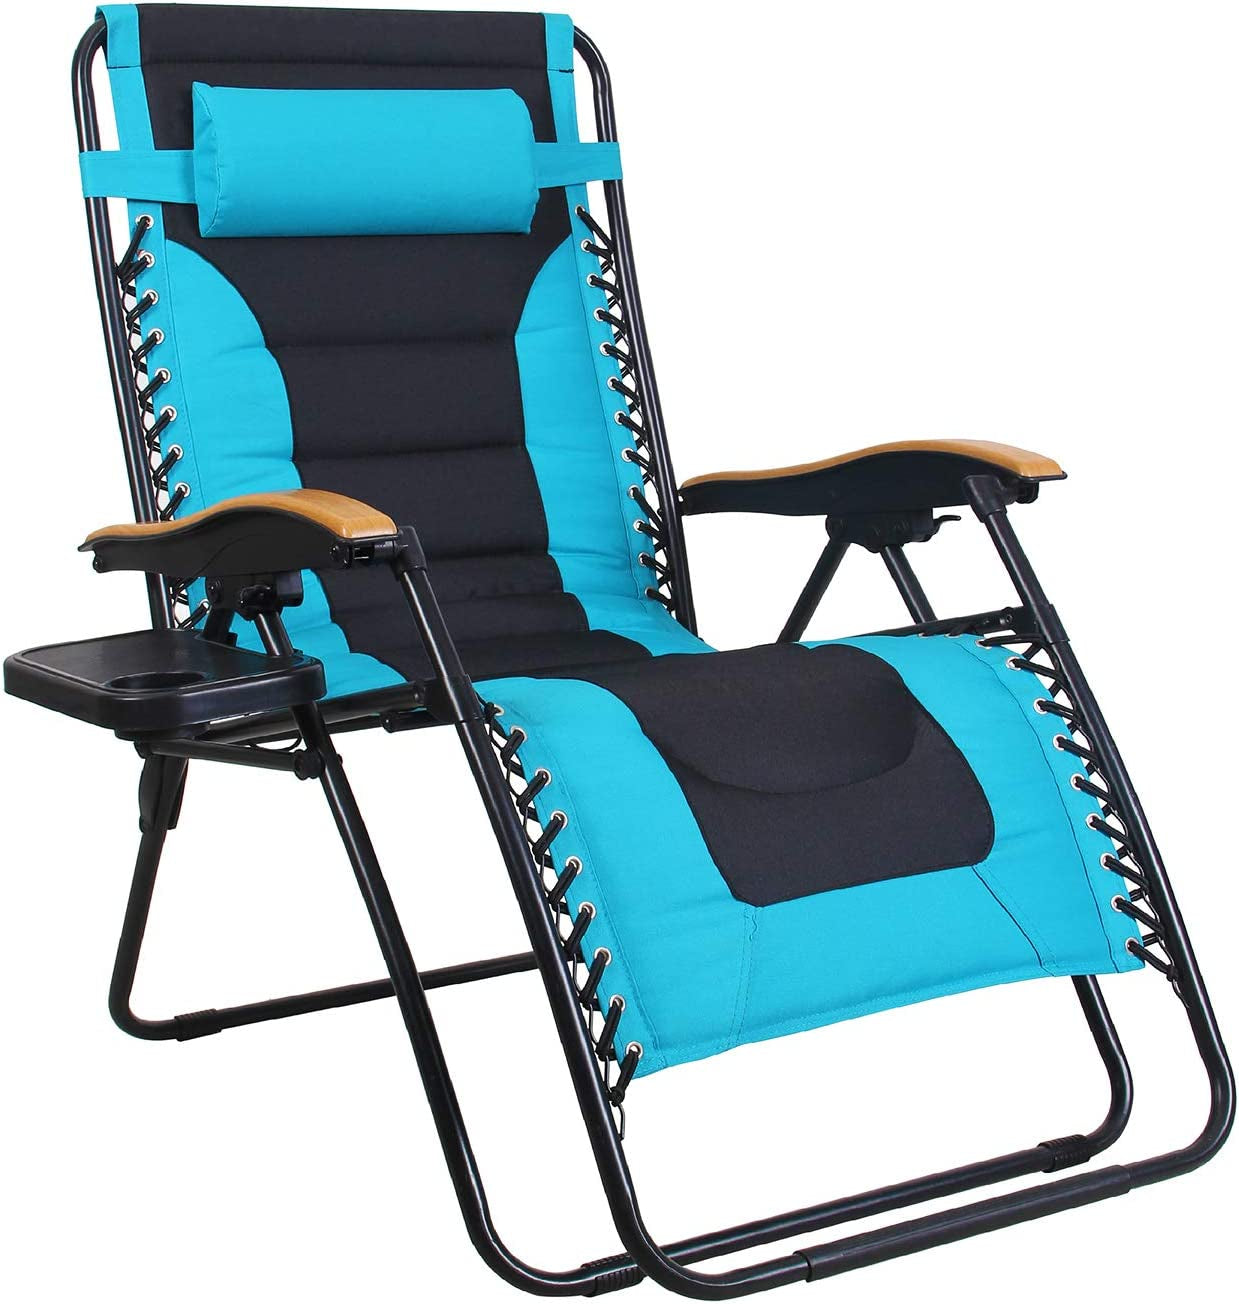 MFSTUDIO, MFSTUDIO Oversized Zero Gravity Chair XL Outdoor Recliners Padded Folding Chair with Cup Holder Pillow, Extra Wide Patio Lounge Chairs for Poolside Camping Lawn Beach, Support 400Lbs(Pacific Blue)